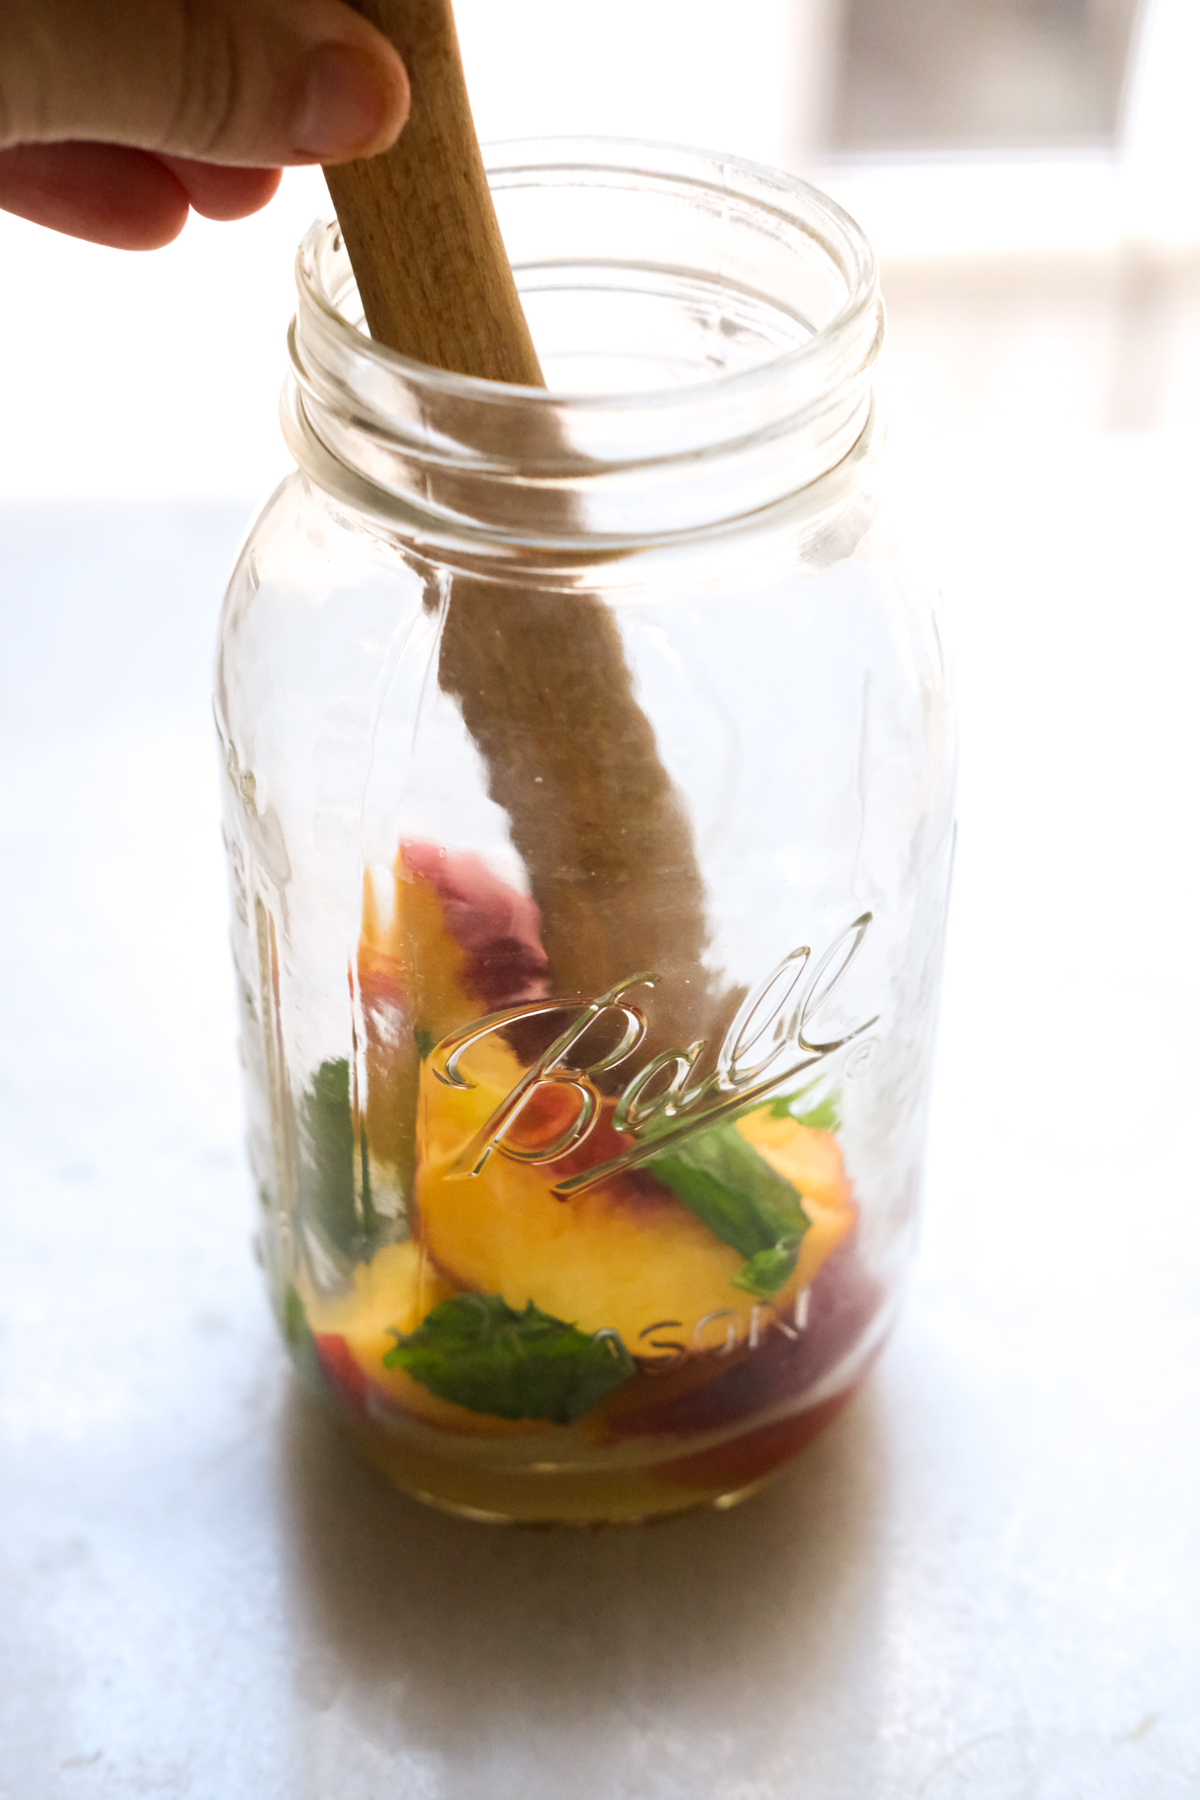 muddling peach slices and mint with lemon for a cocktail